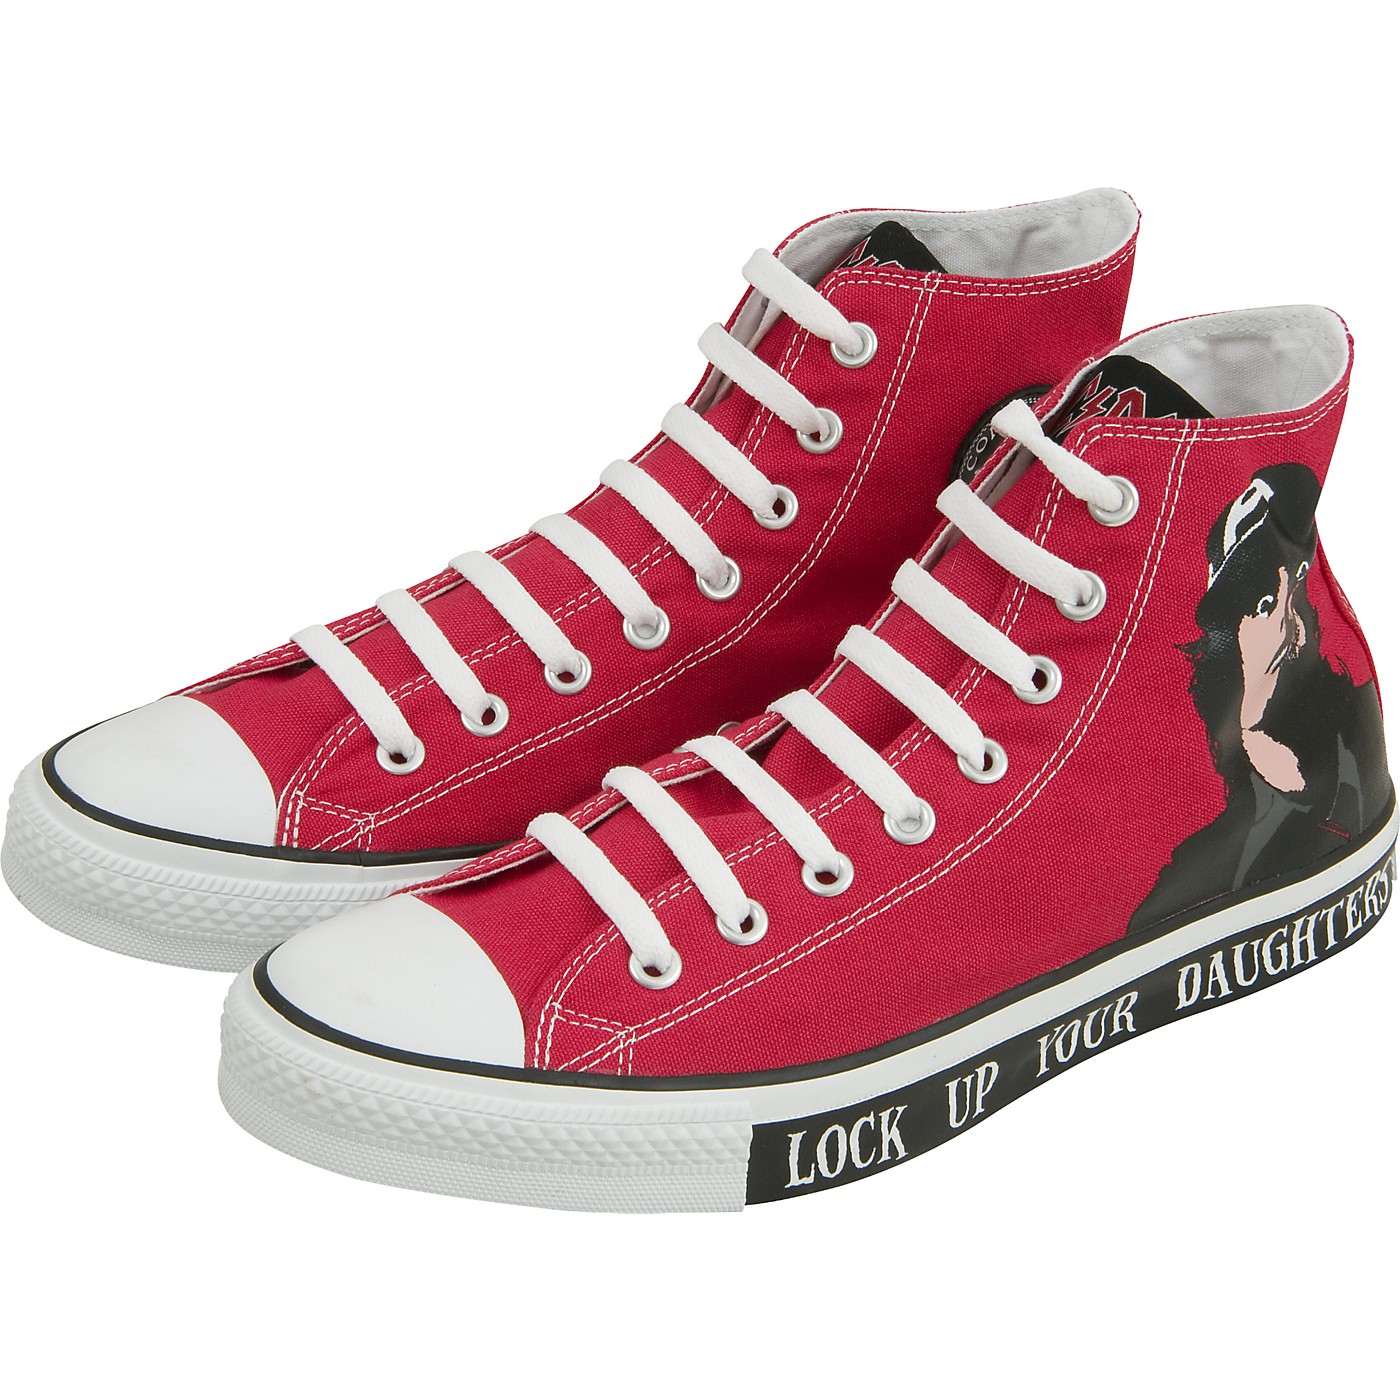 Converse Chuck Taylor All Star AC/DC Lock Up Your Daughters Hi-Top Sneakers  - Woodwind & Brasswind